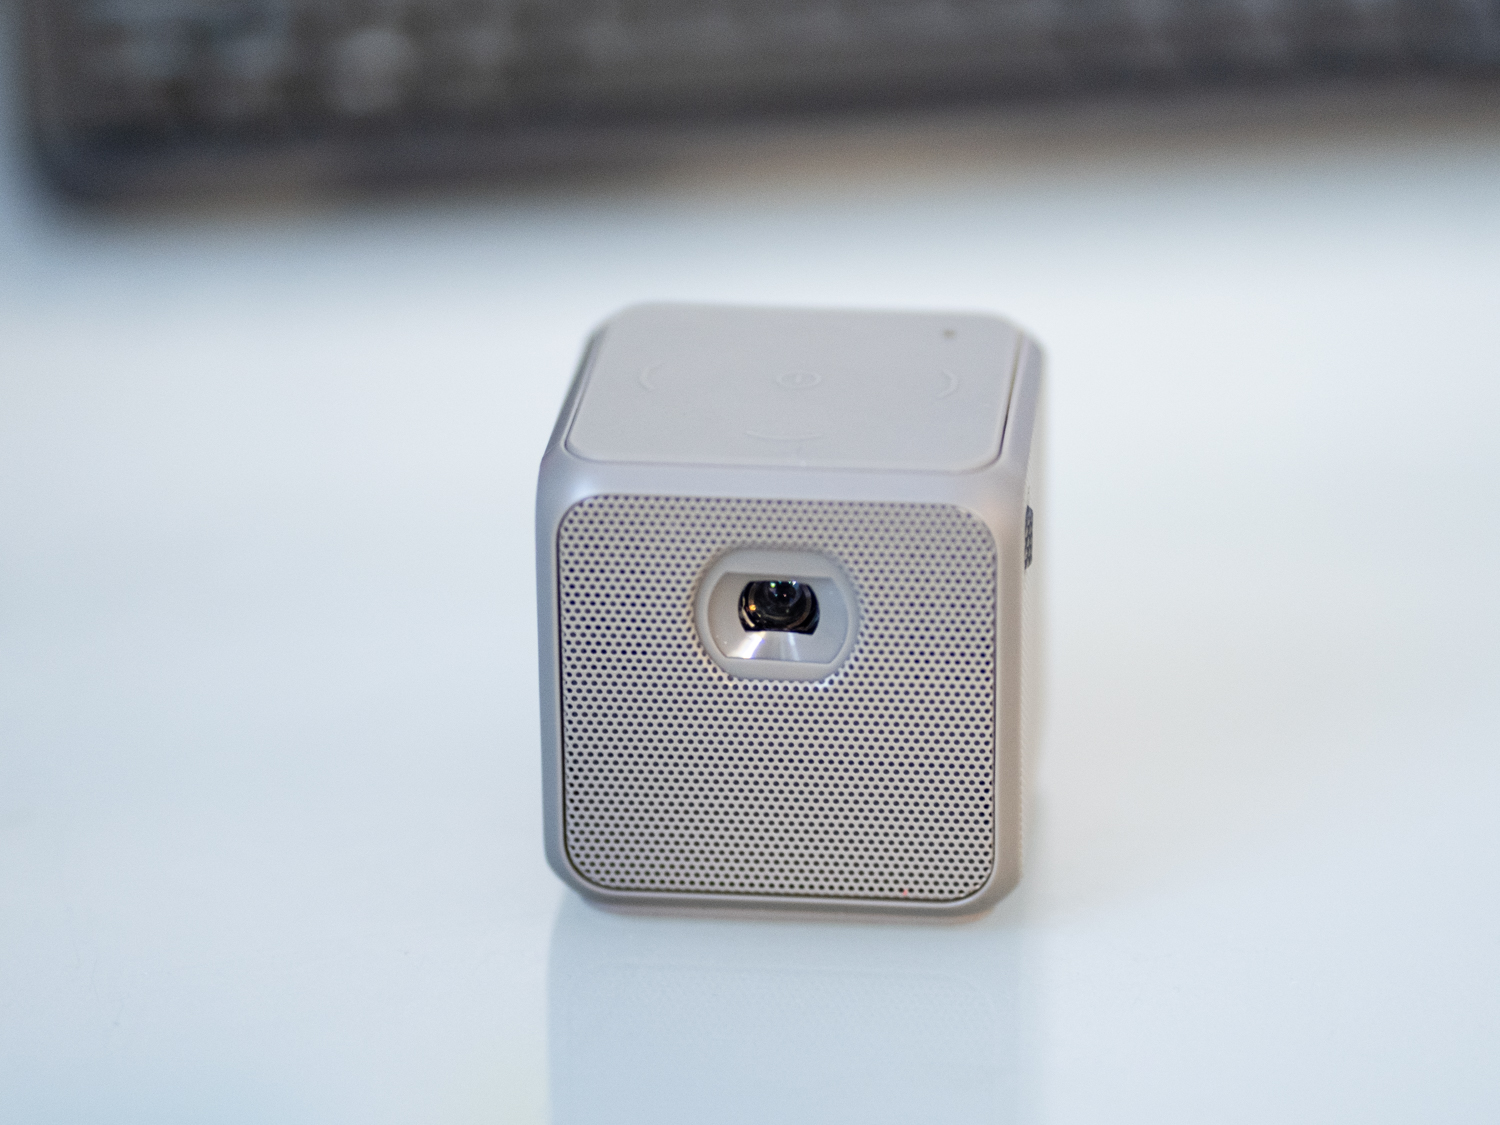 A photo of the front of the XPRIT smart cube projector